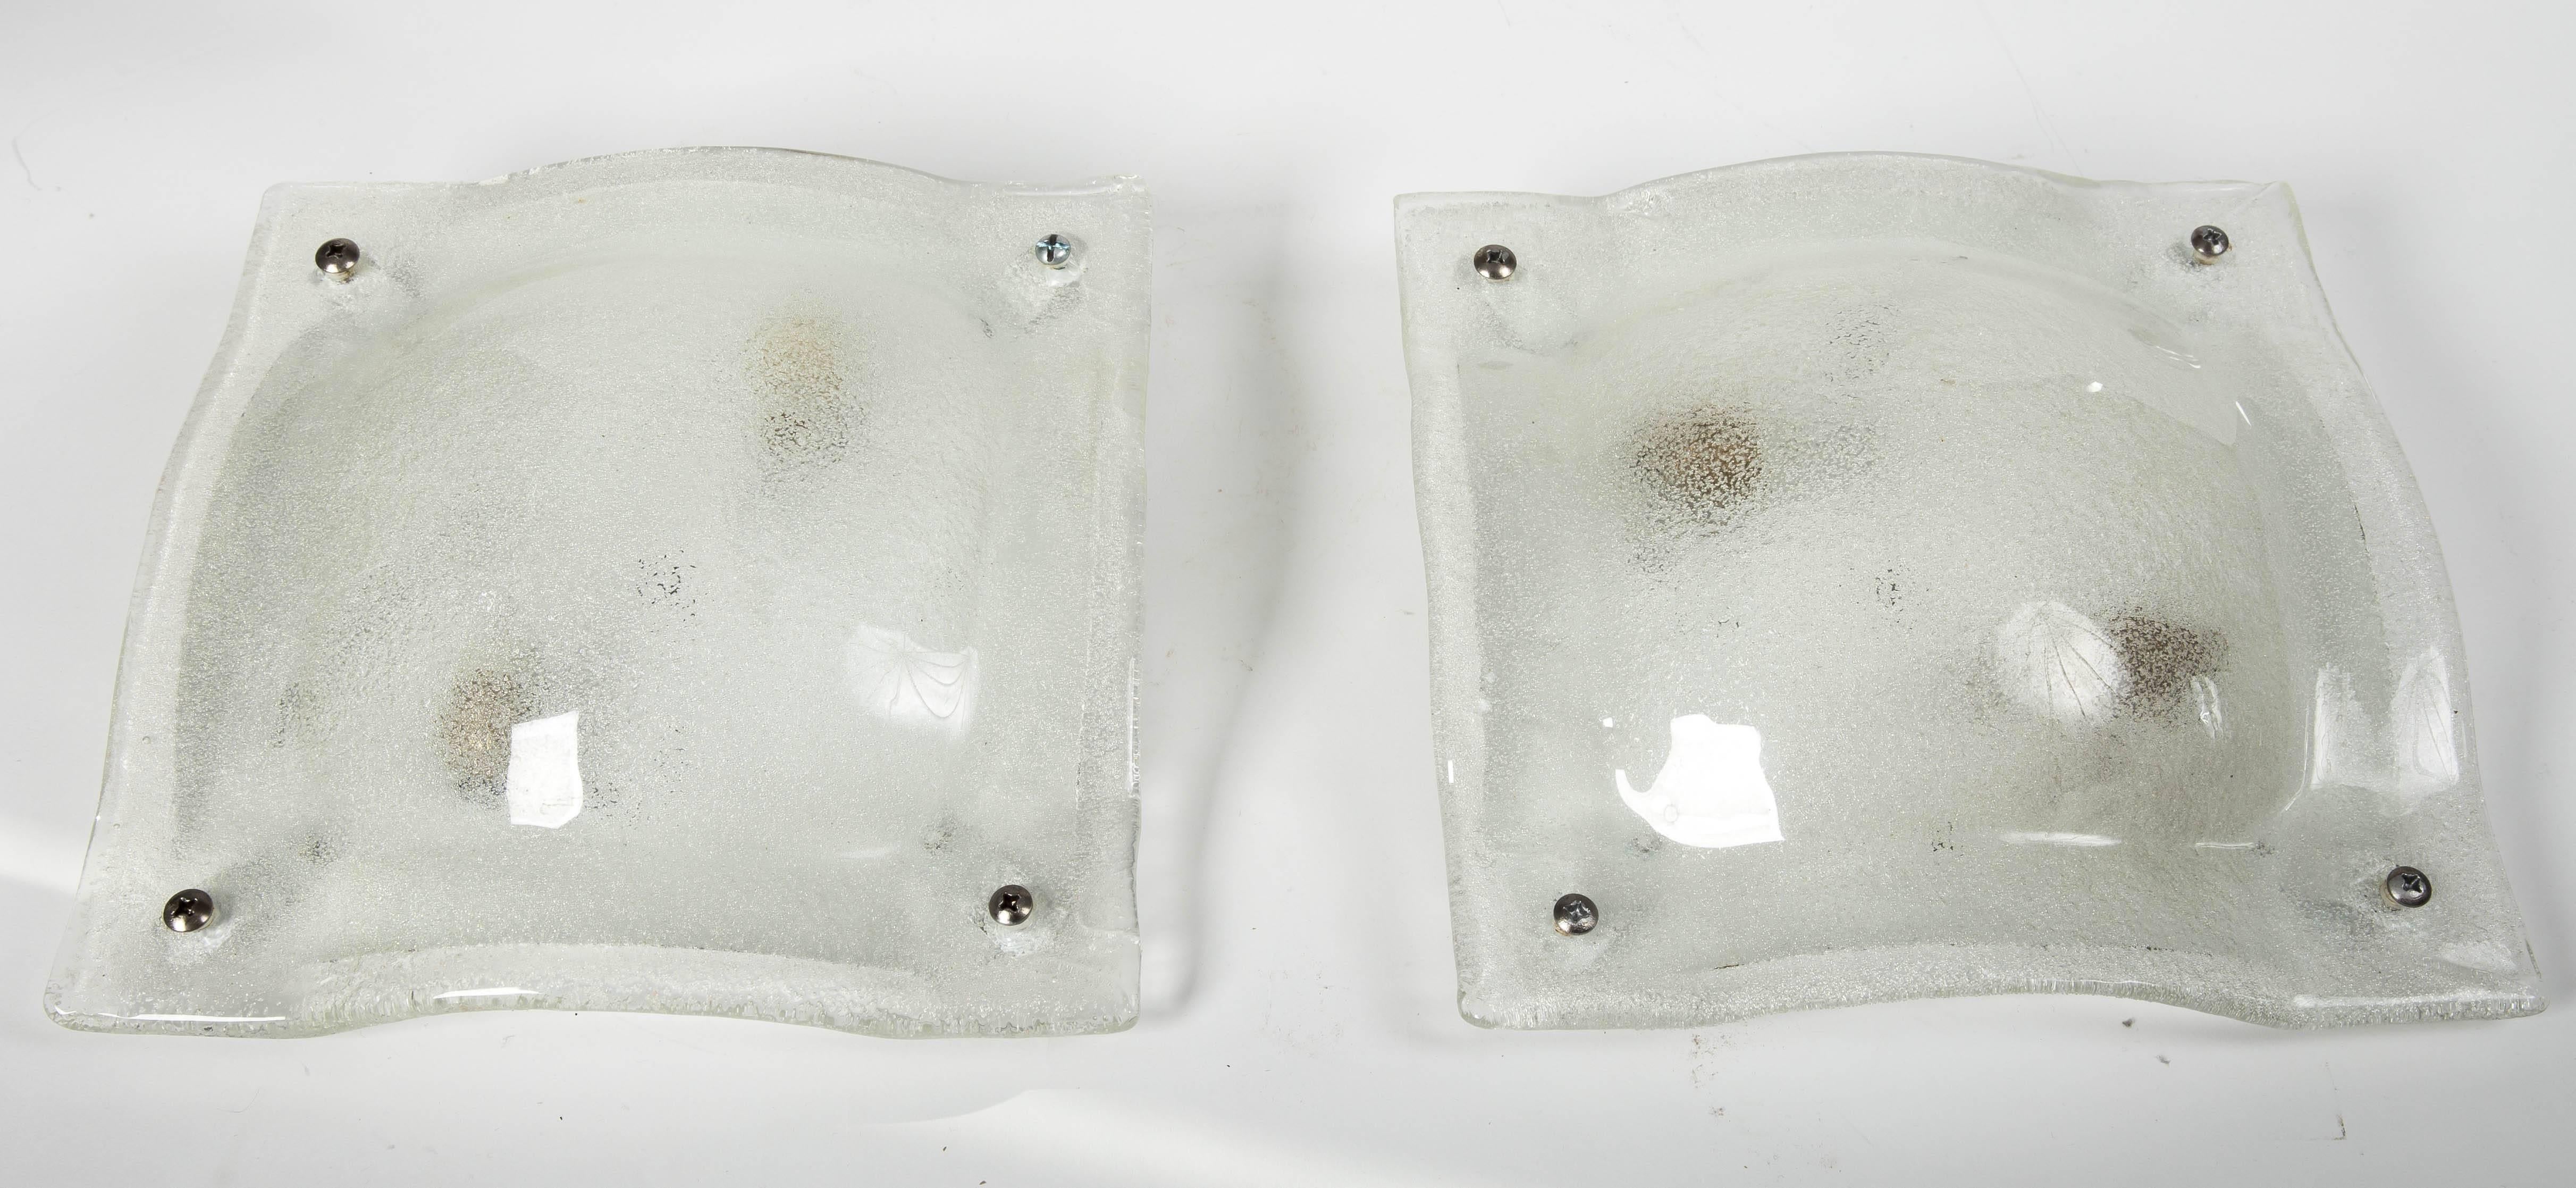 Pair of clear and white lattimo glass convex square sconces with inclusive air bubbles by Vistosi
Multiple pairs available.